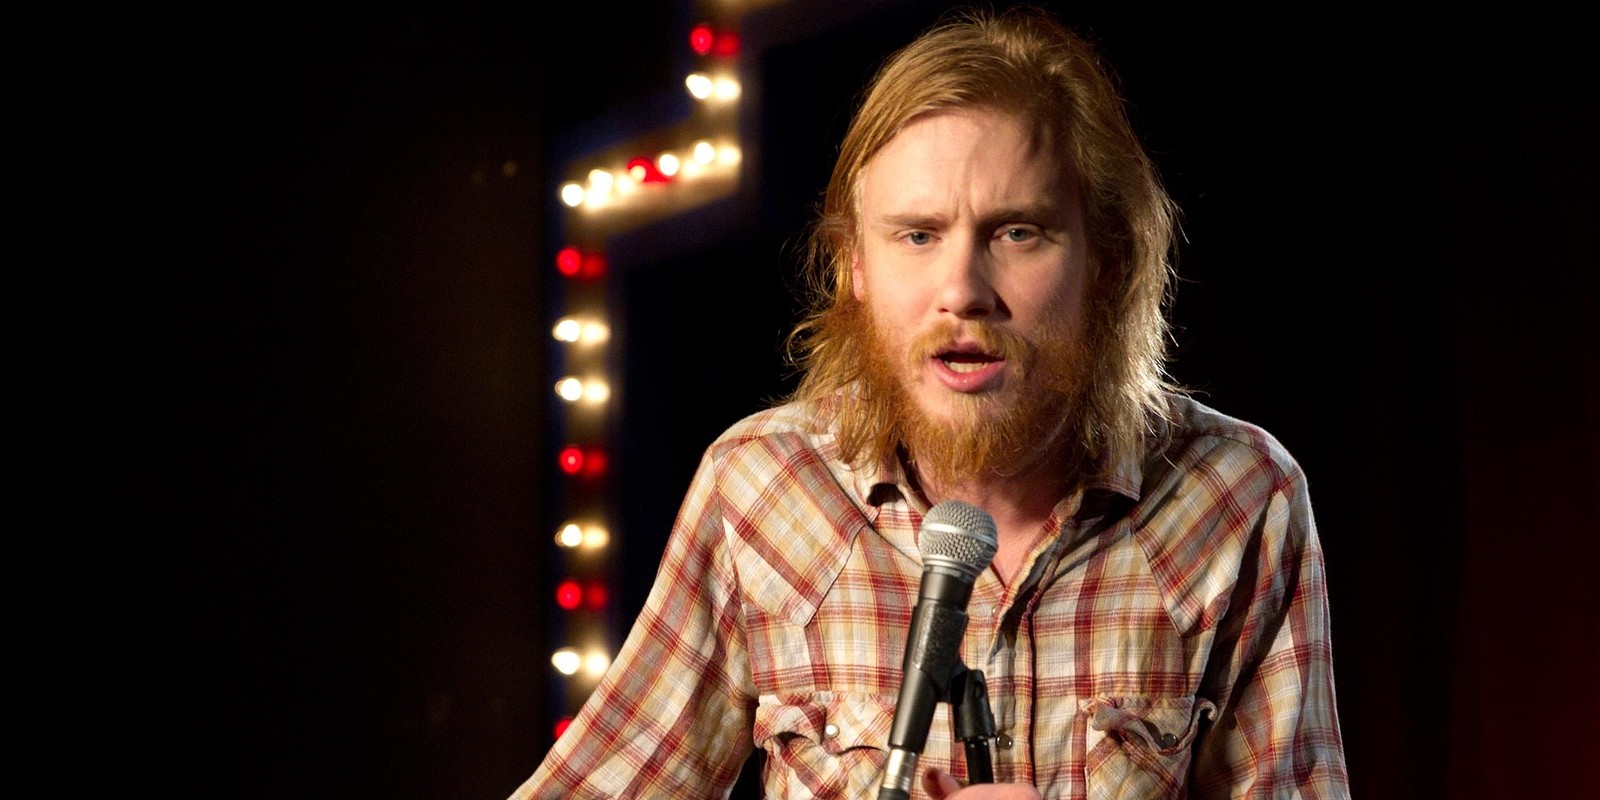 Comedy with Bobby Mair and Harriet Kemsley at The Cheese Comedy Club